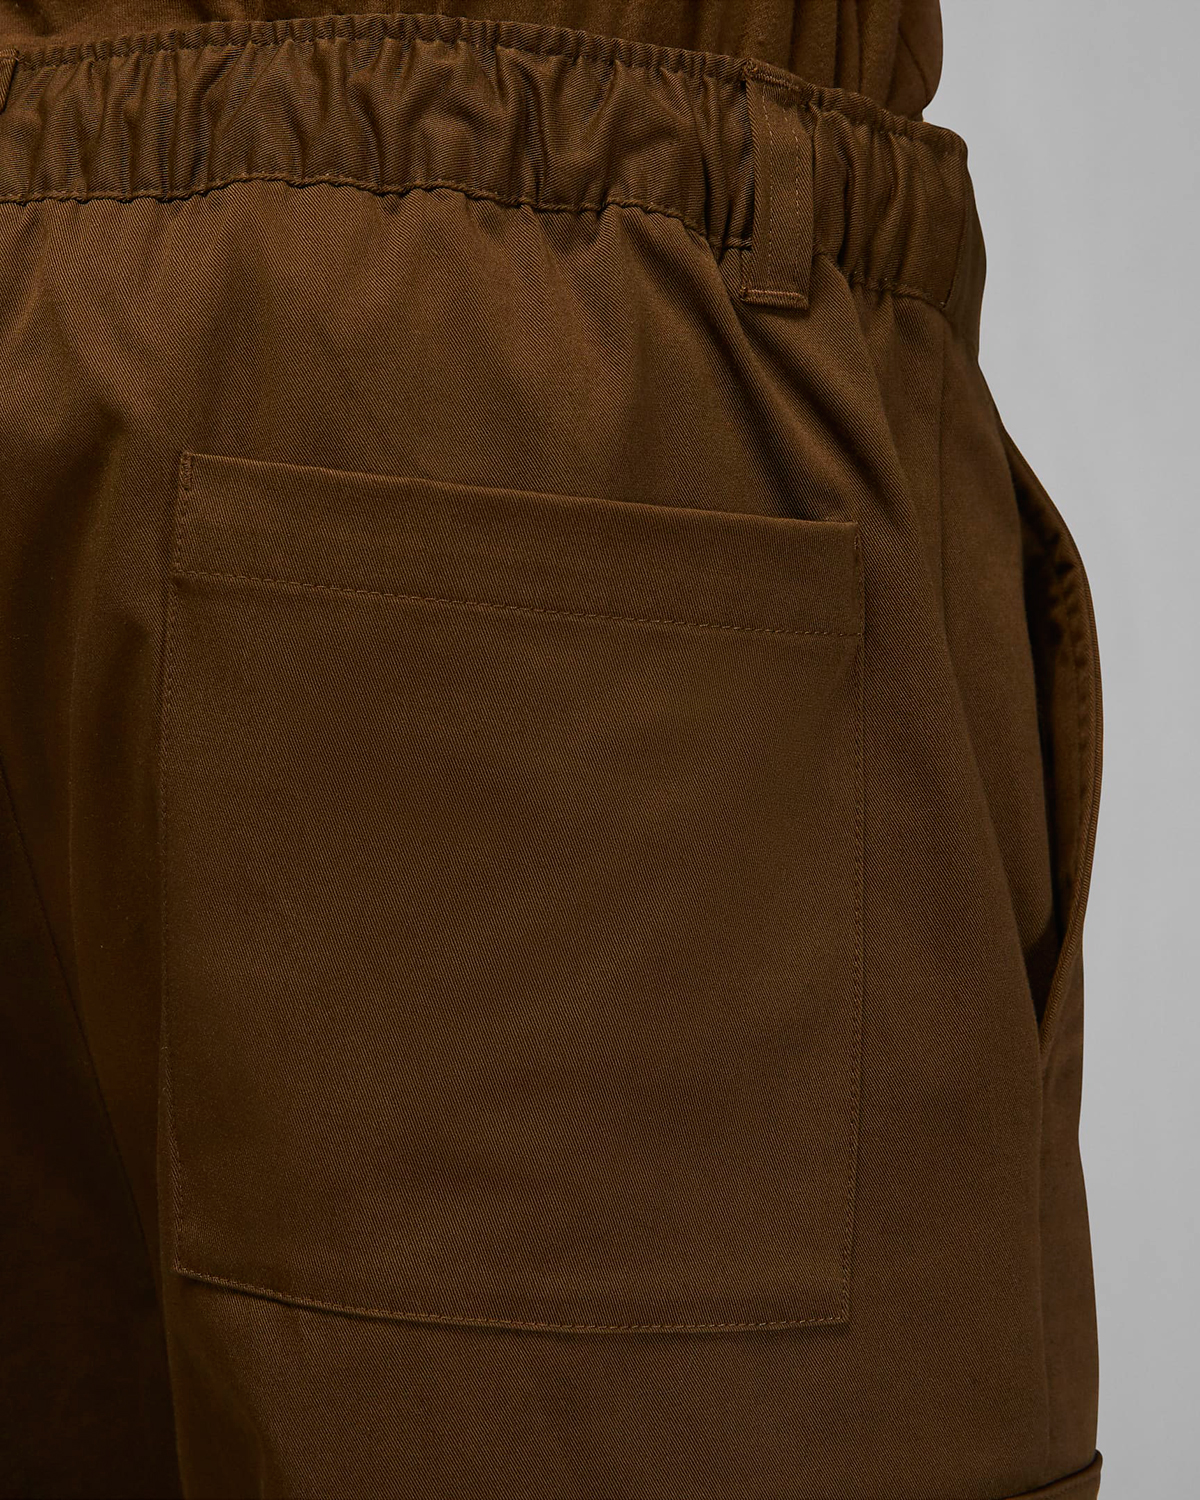 Jordan Essentials Utility Pants Available in Light Olive